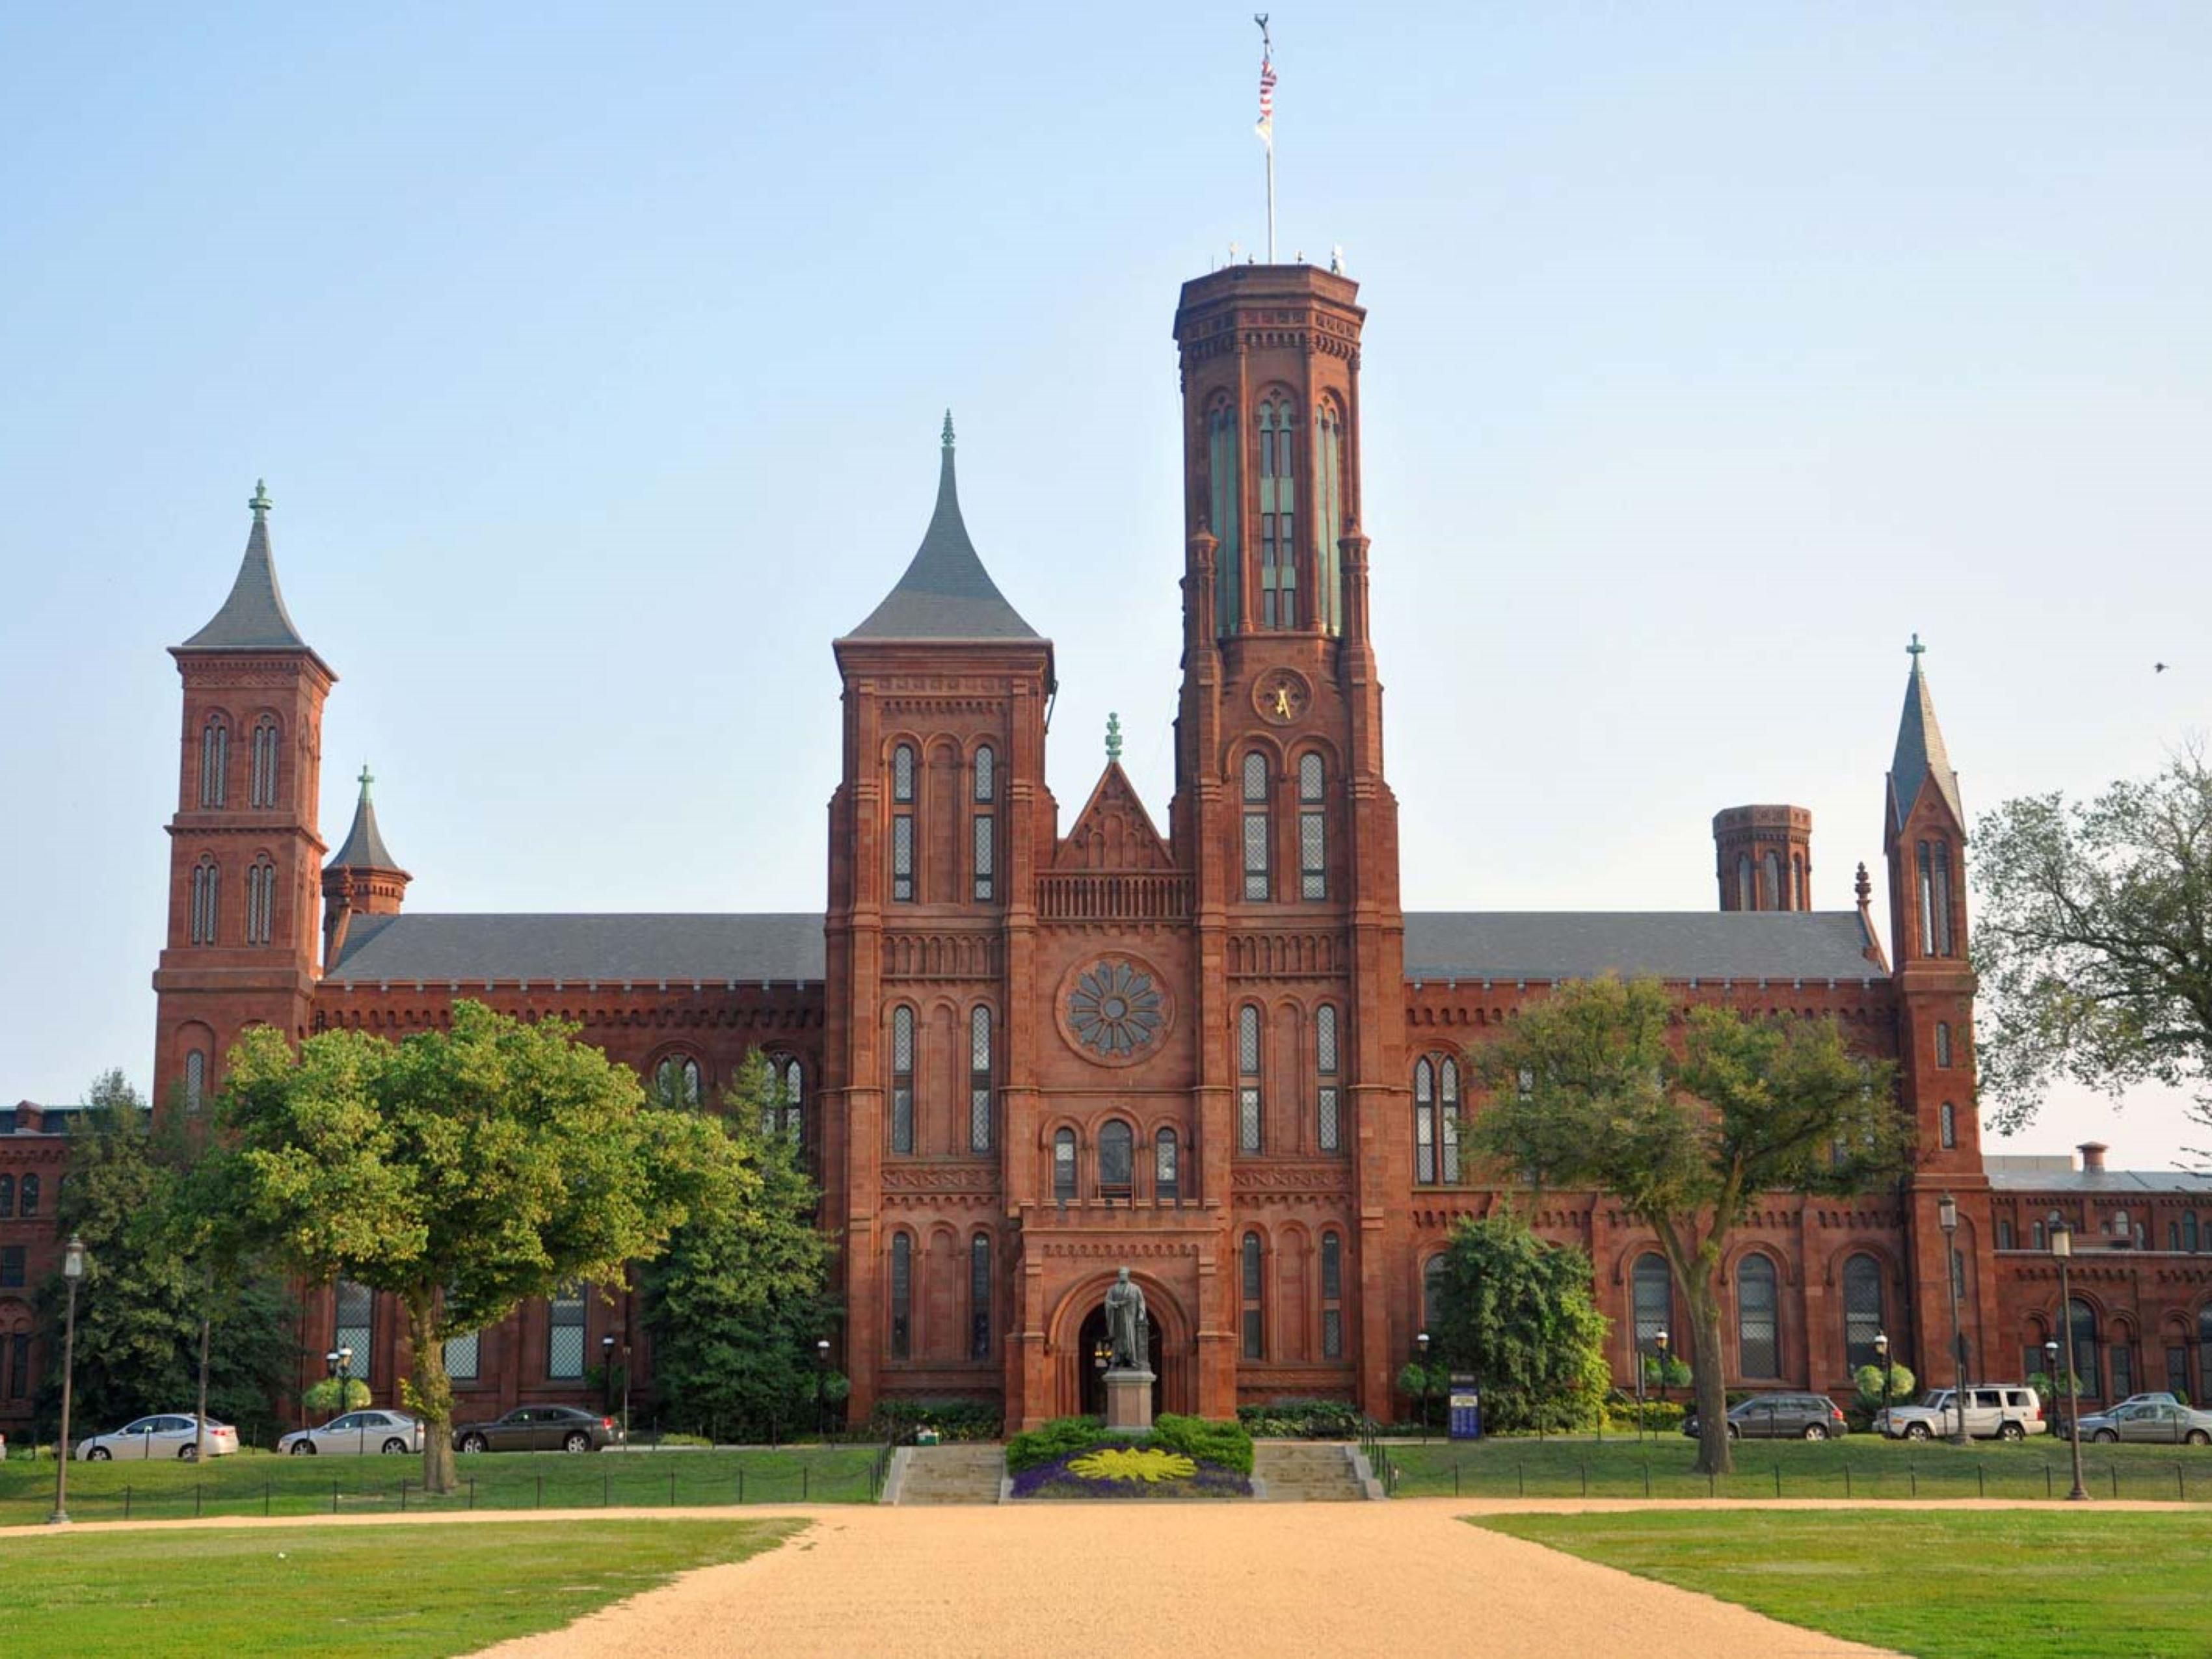 Quick Access to the Smithsonian